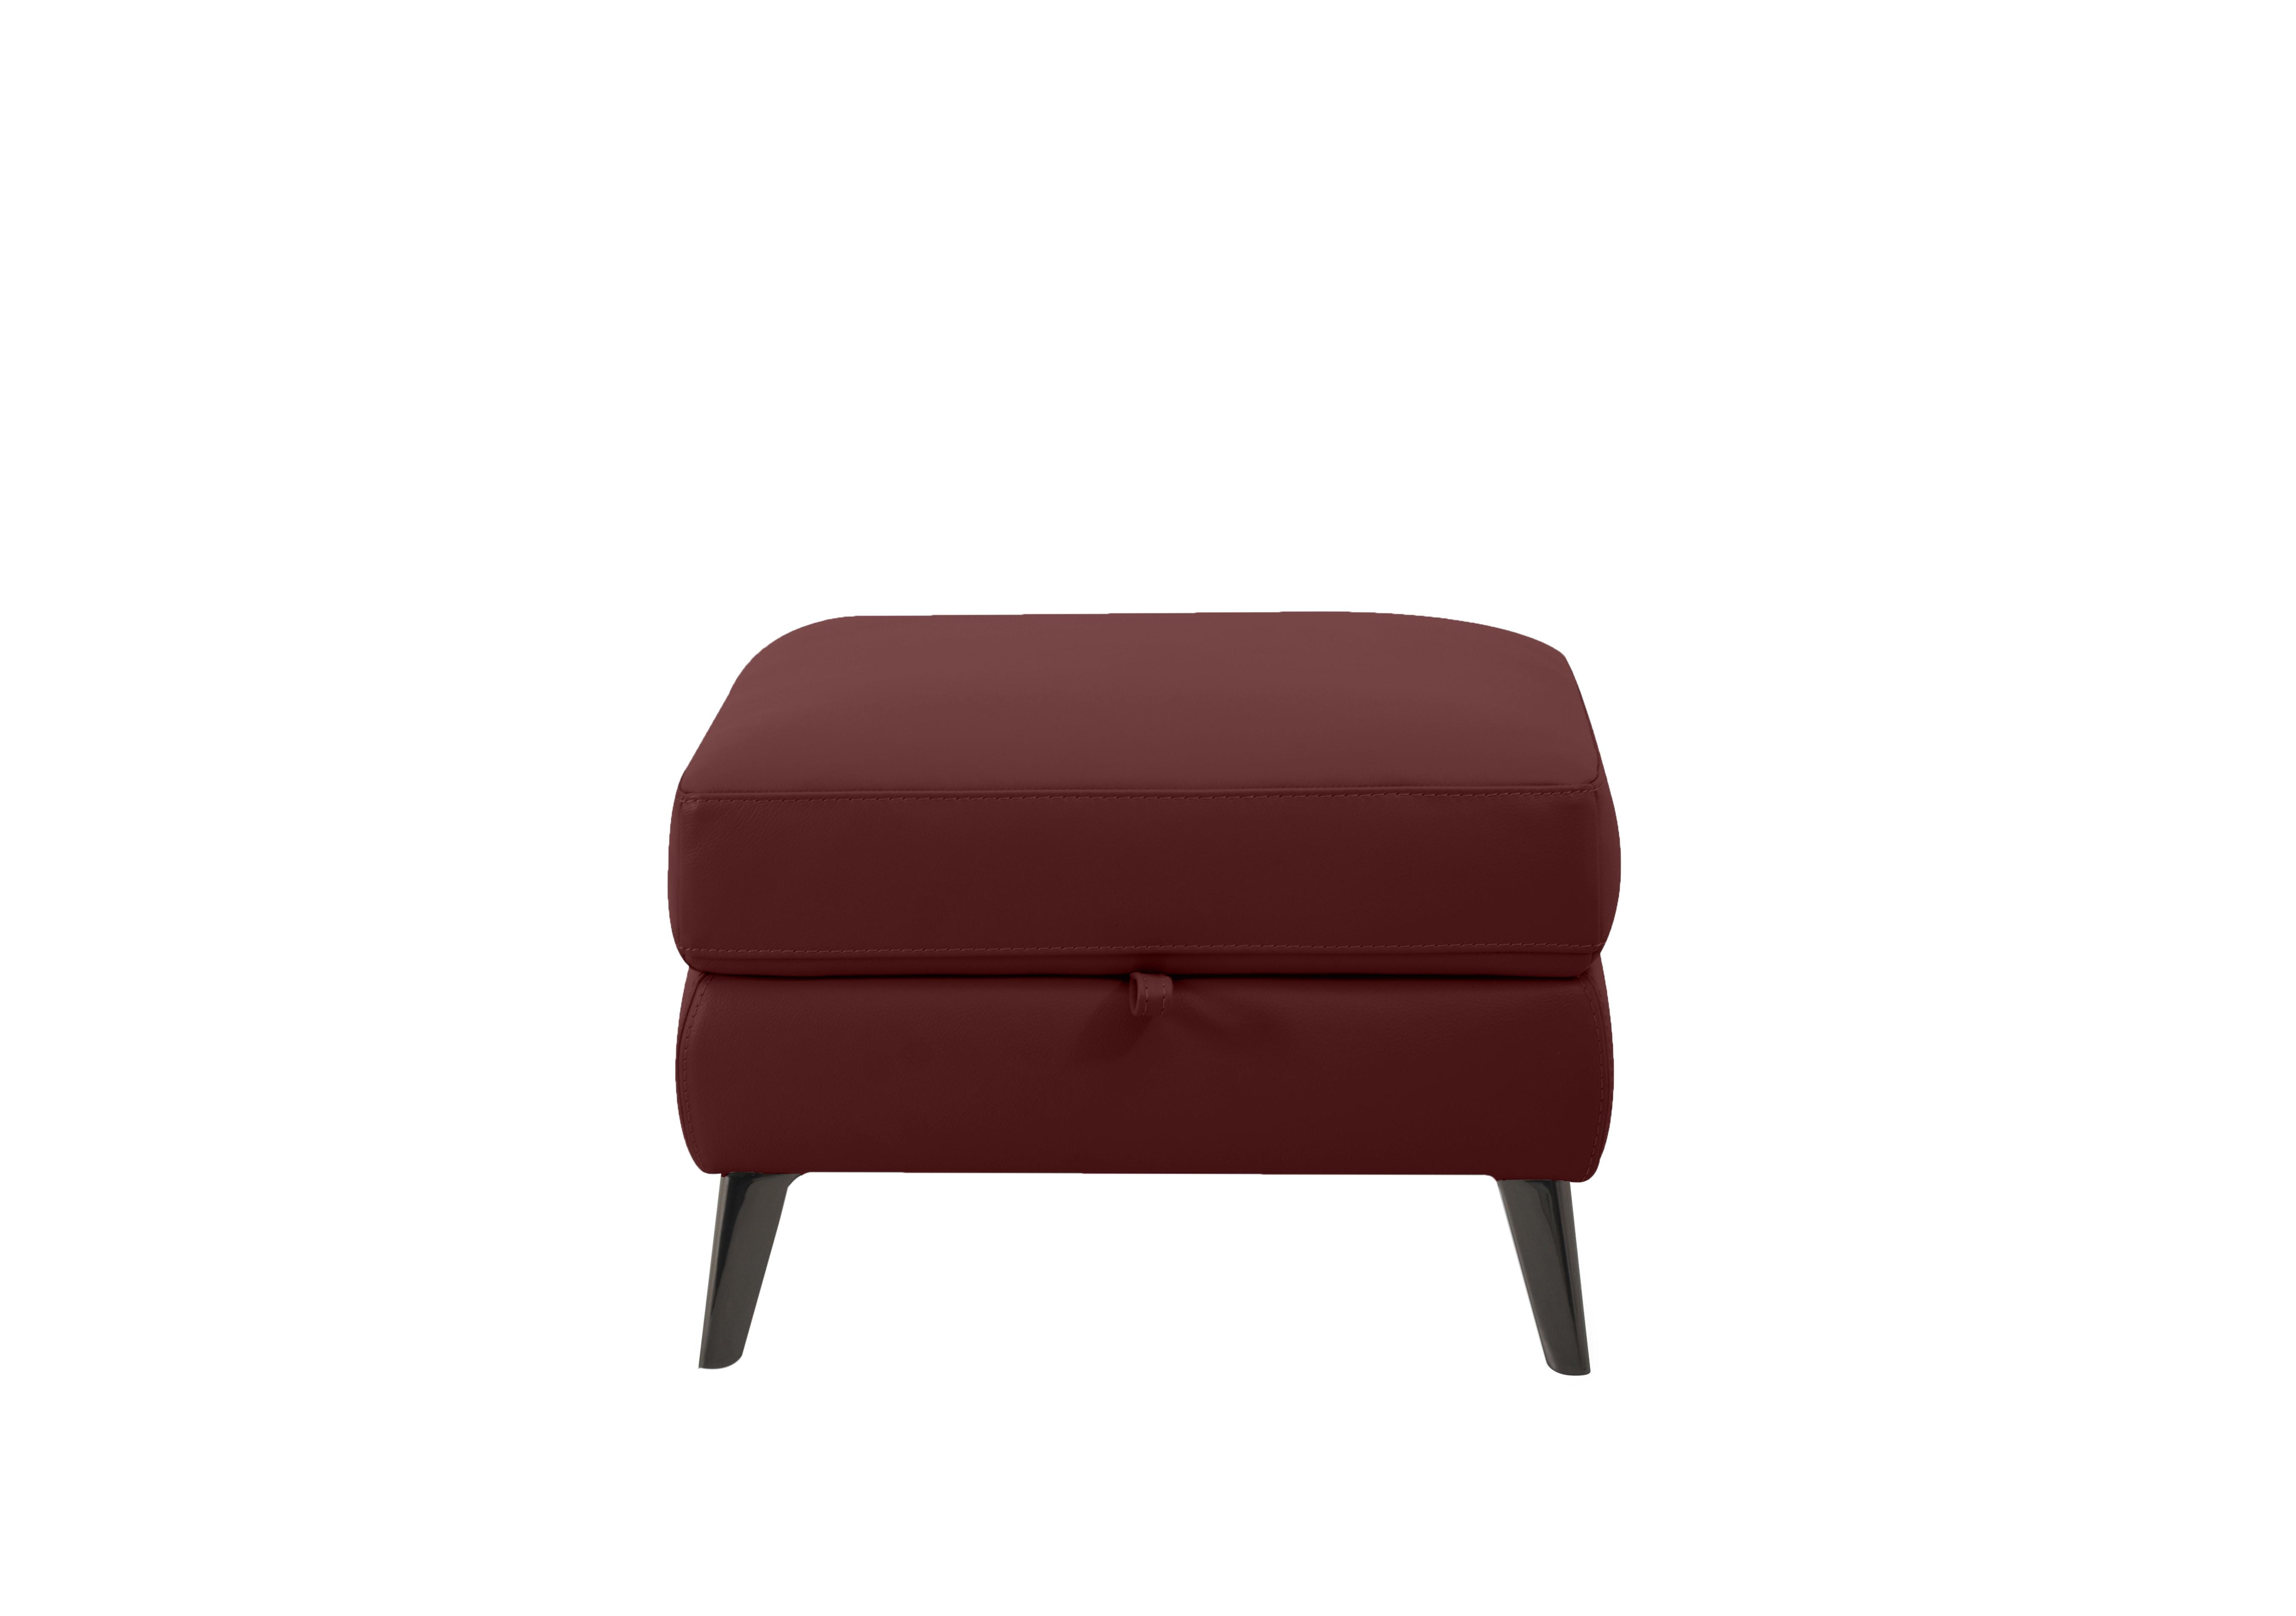 Axel Leather Storage Footstool in Bv-035c Deep Red on Furniture Village